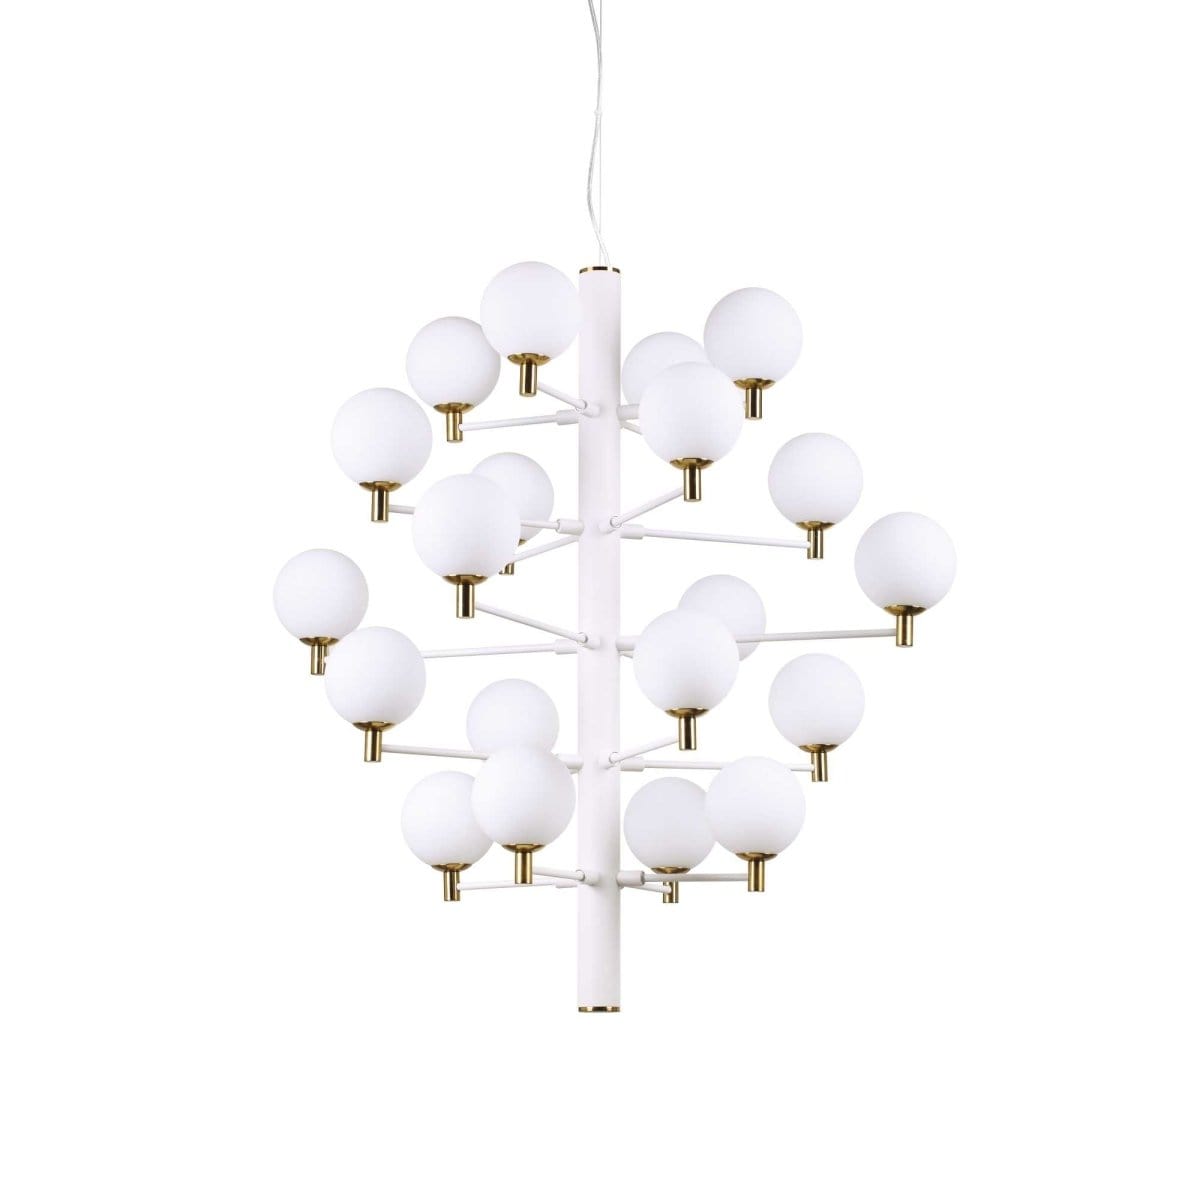 Ideal Lux Lighting Chandeliers White and brass Coperinico Chandelier